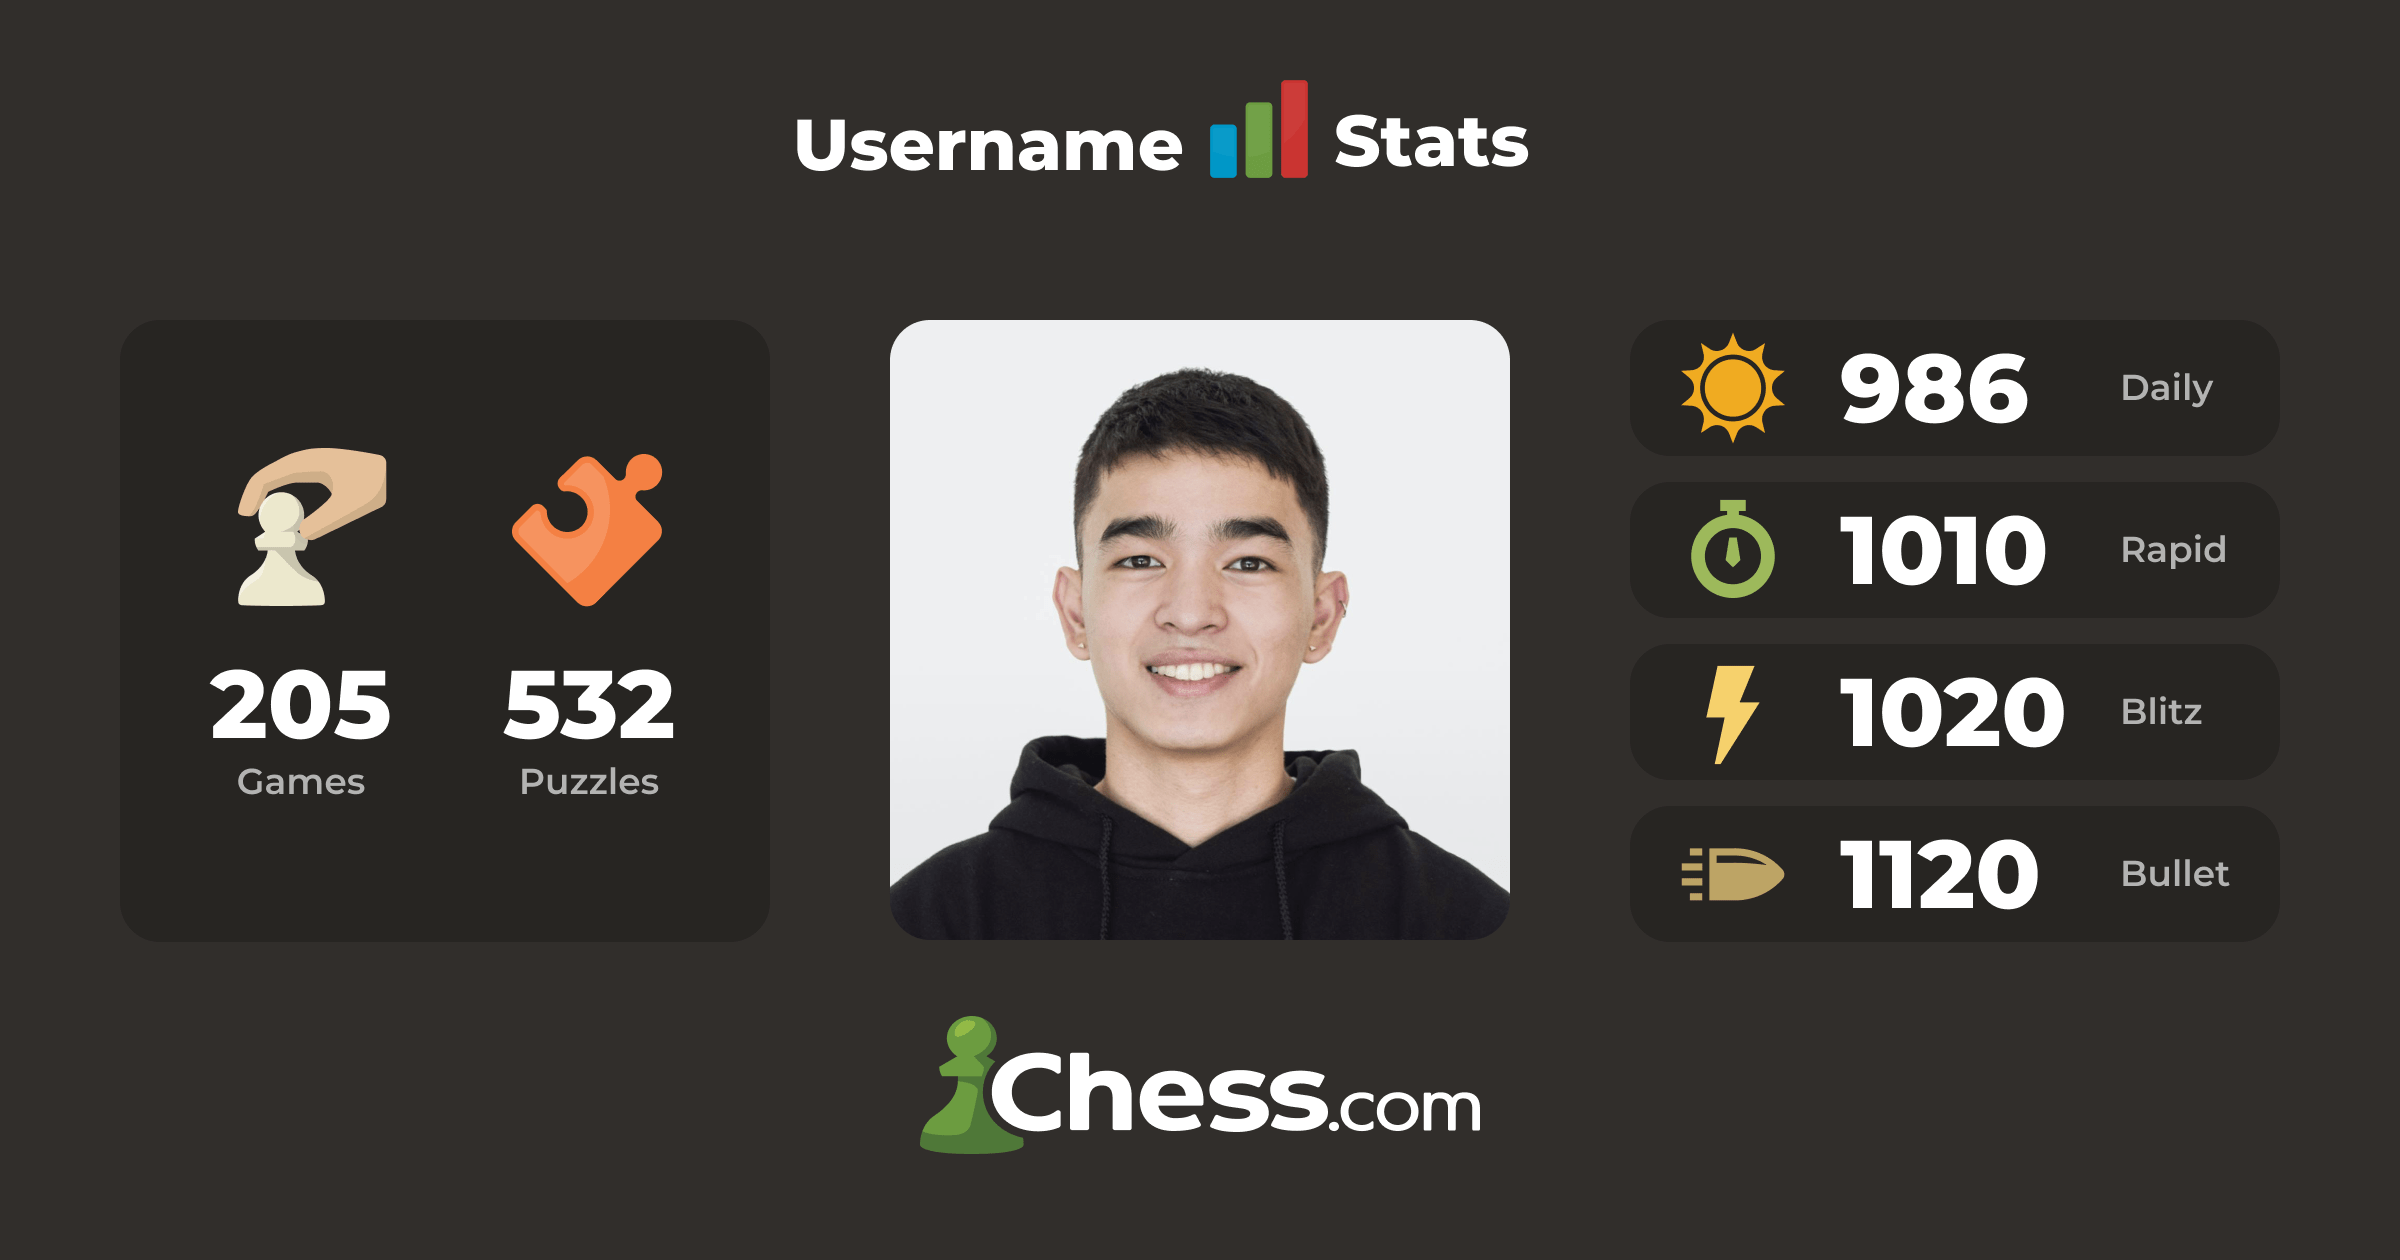 An example of a dynamic social image generated by Chess.com, featuring a user profile with their username and basic chess stats.